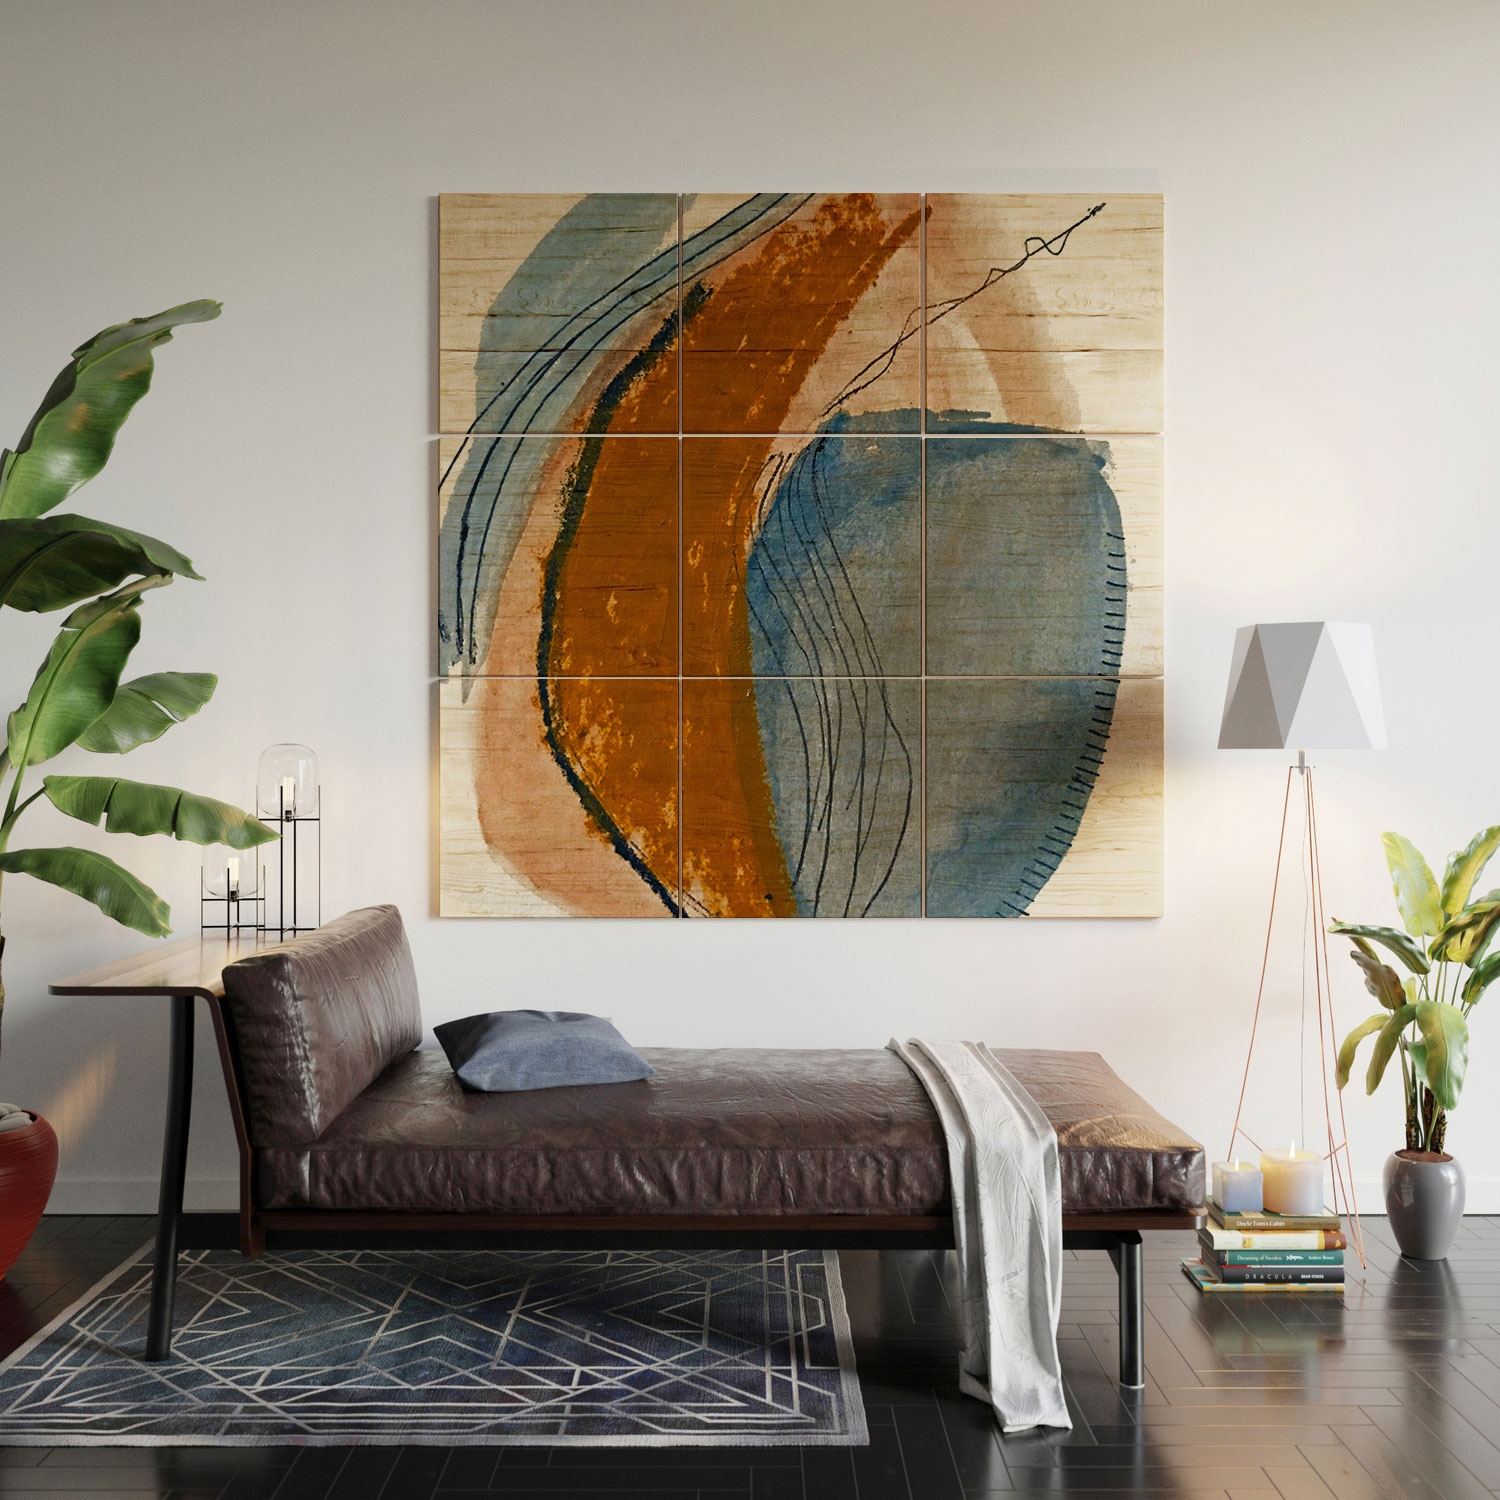 Gentle Breeze A Minimal Abstract by Alyssa Hamilton Art - Wood Wall Mural4' x 4' (Nine 16" Wood Squares) - Image 2